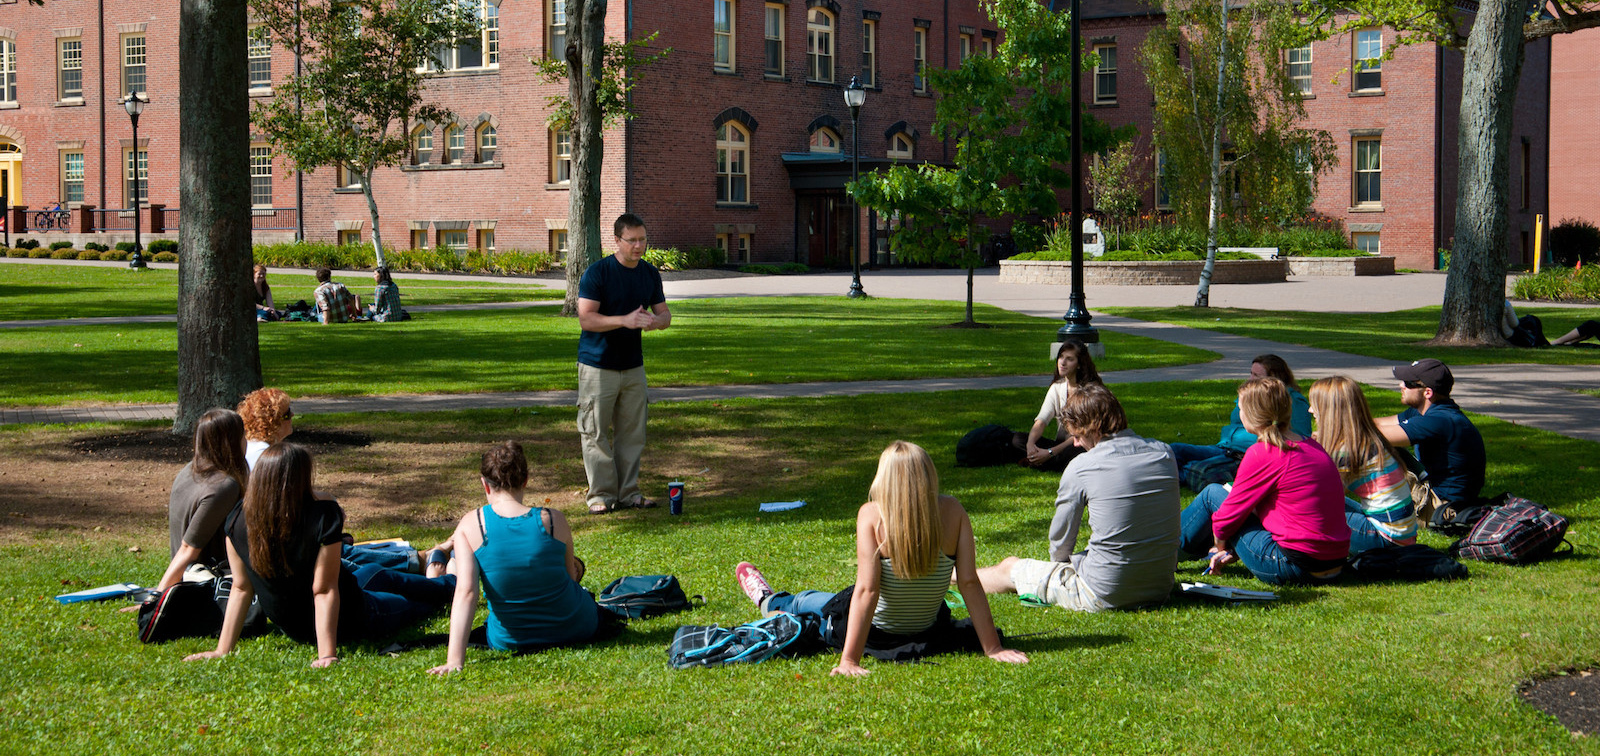 students listening to an outdoor lecture in the quad